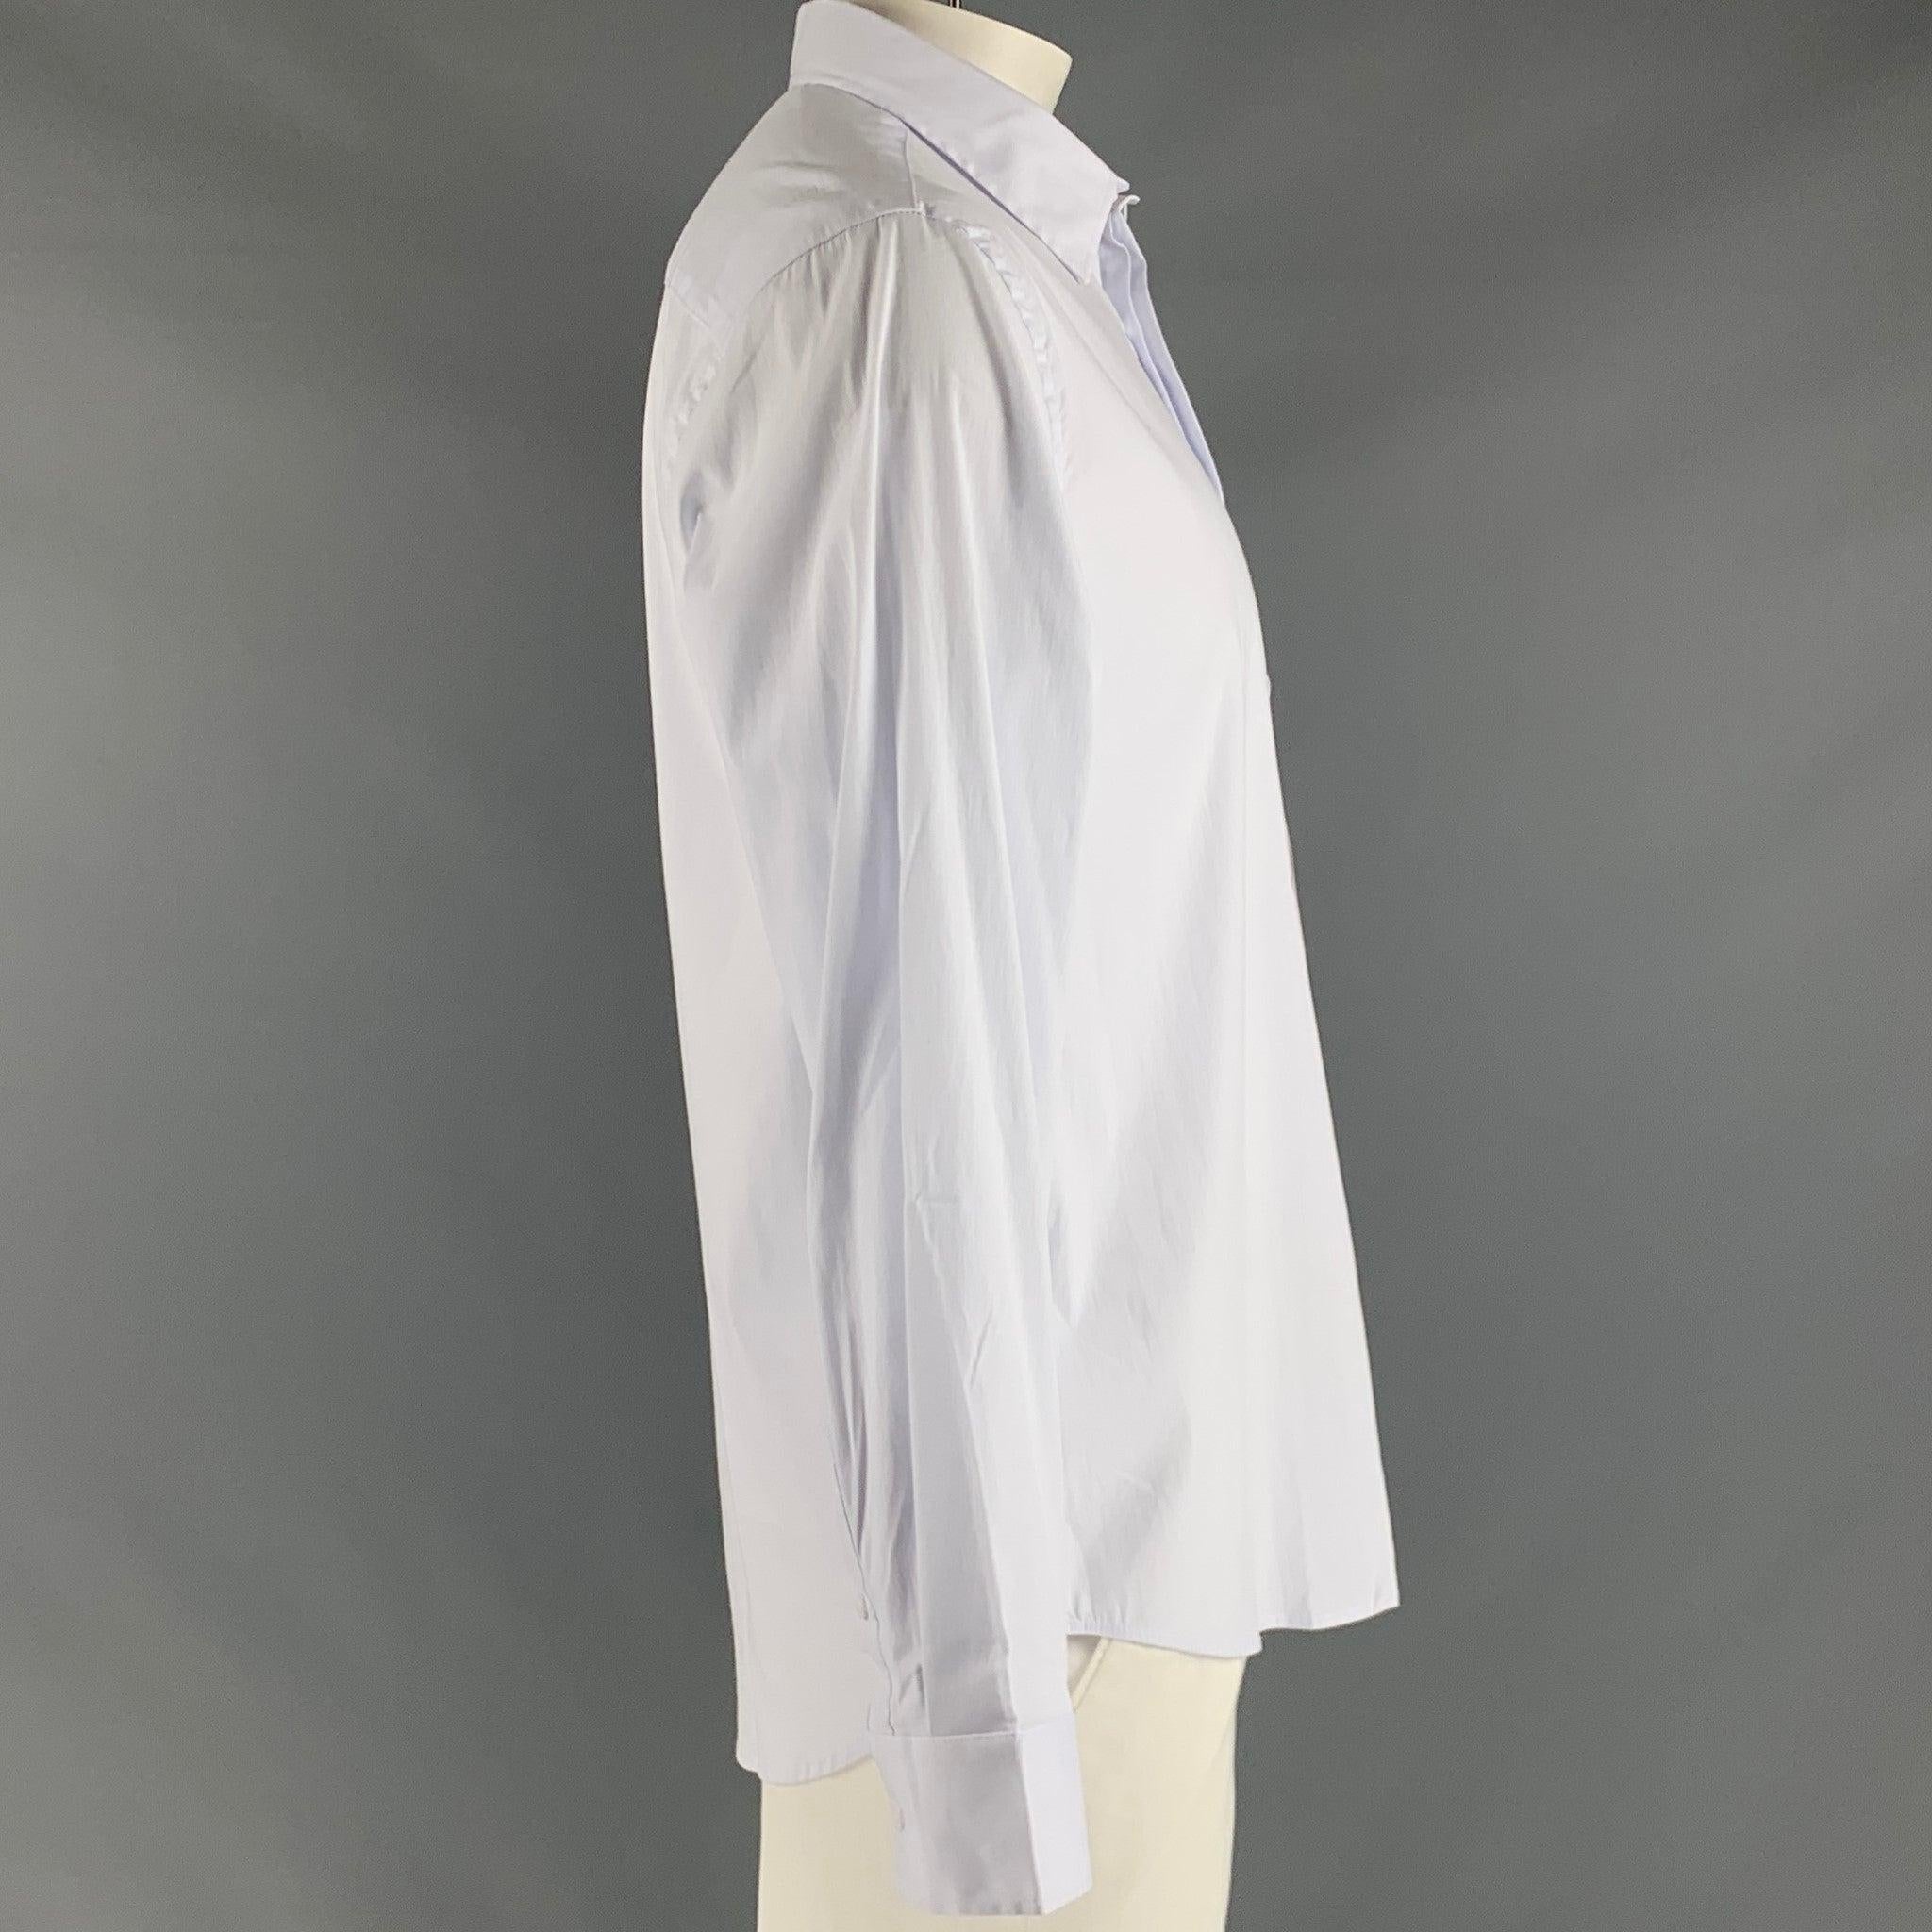 JOHN RICHMOND long sleeve shirt
in a white cotton blend fabric featuring a spread collar and a hidden button closure. Made in Italy.New with Tags. 

Marked:   XL 

Measurements: 
 
Shoulder: 19 inches  Chest: 47 inches  Sleeve: 26.5 inches  Length: